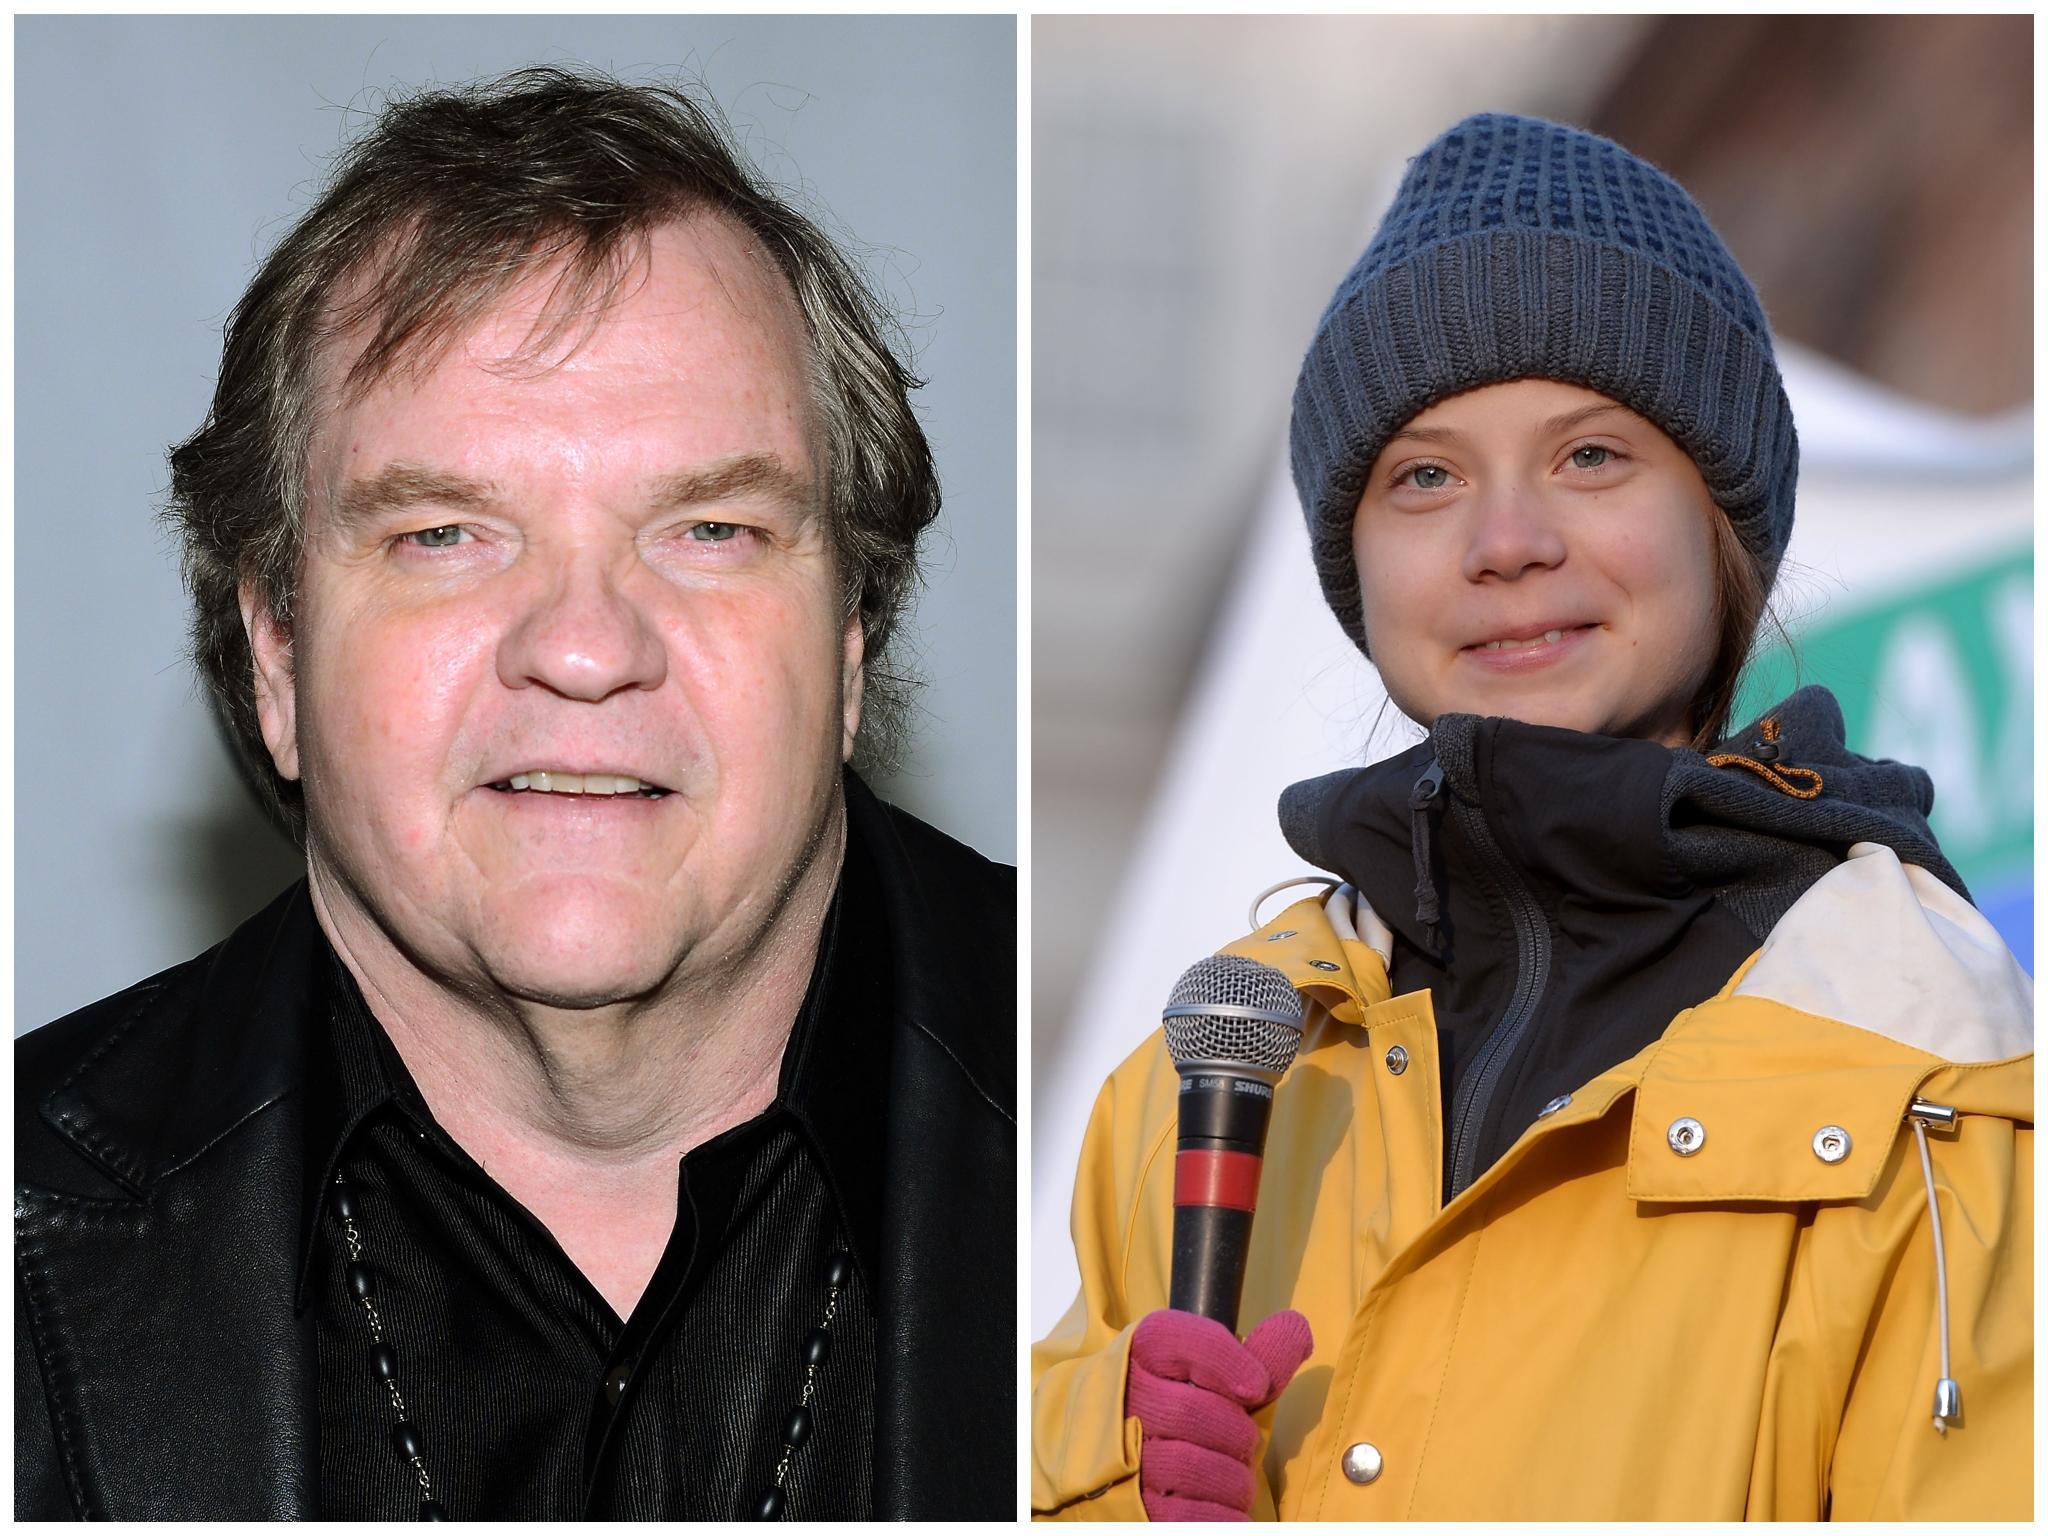 Meat Loaf says Greta Thunberg has been brainwashed into thinking climate change is real - The Independent